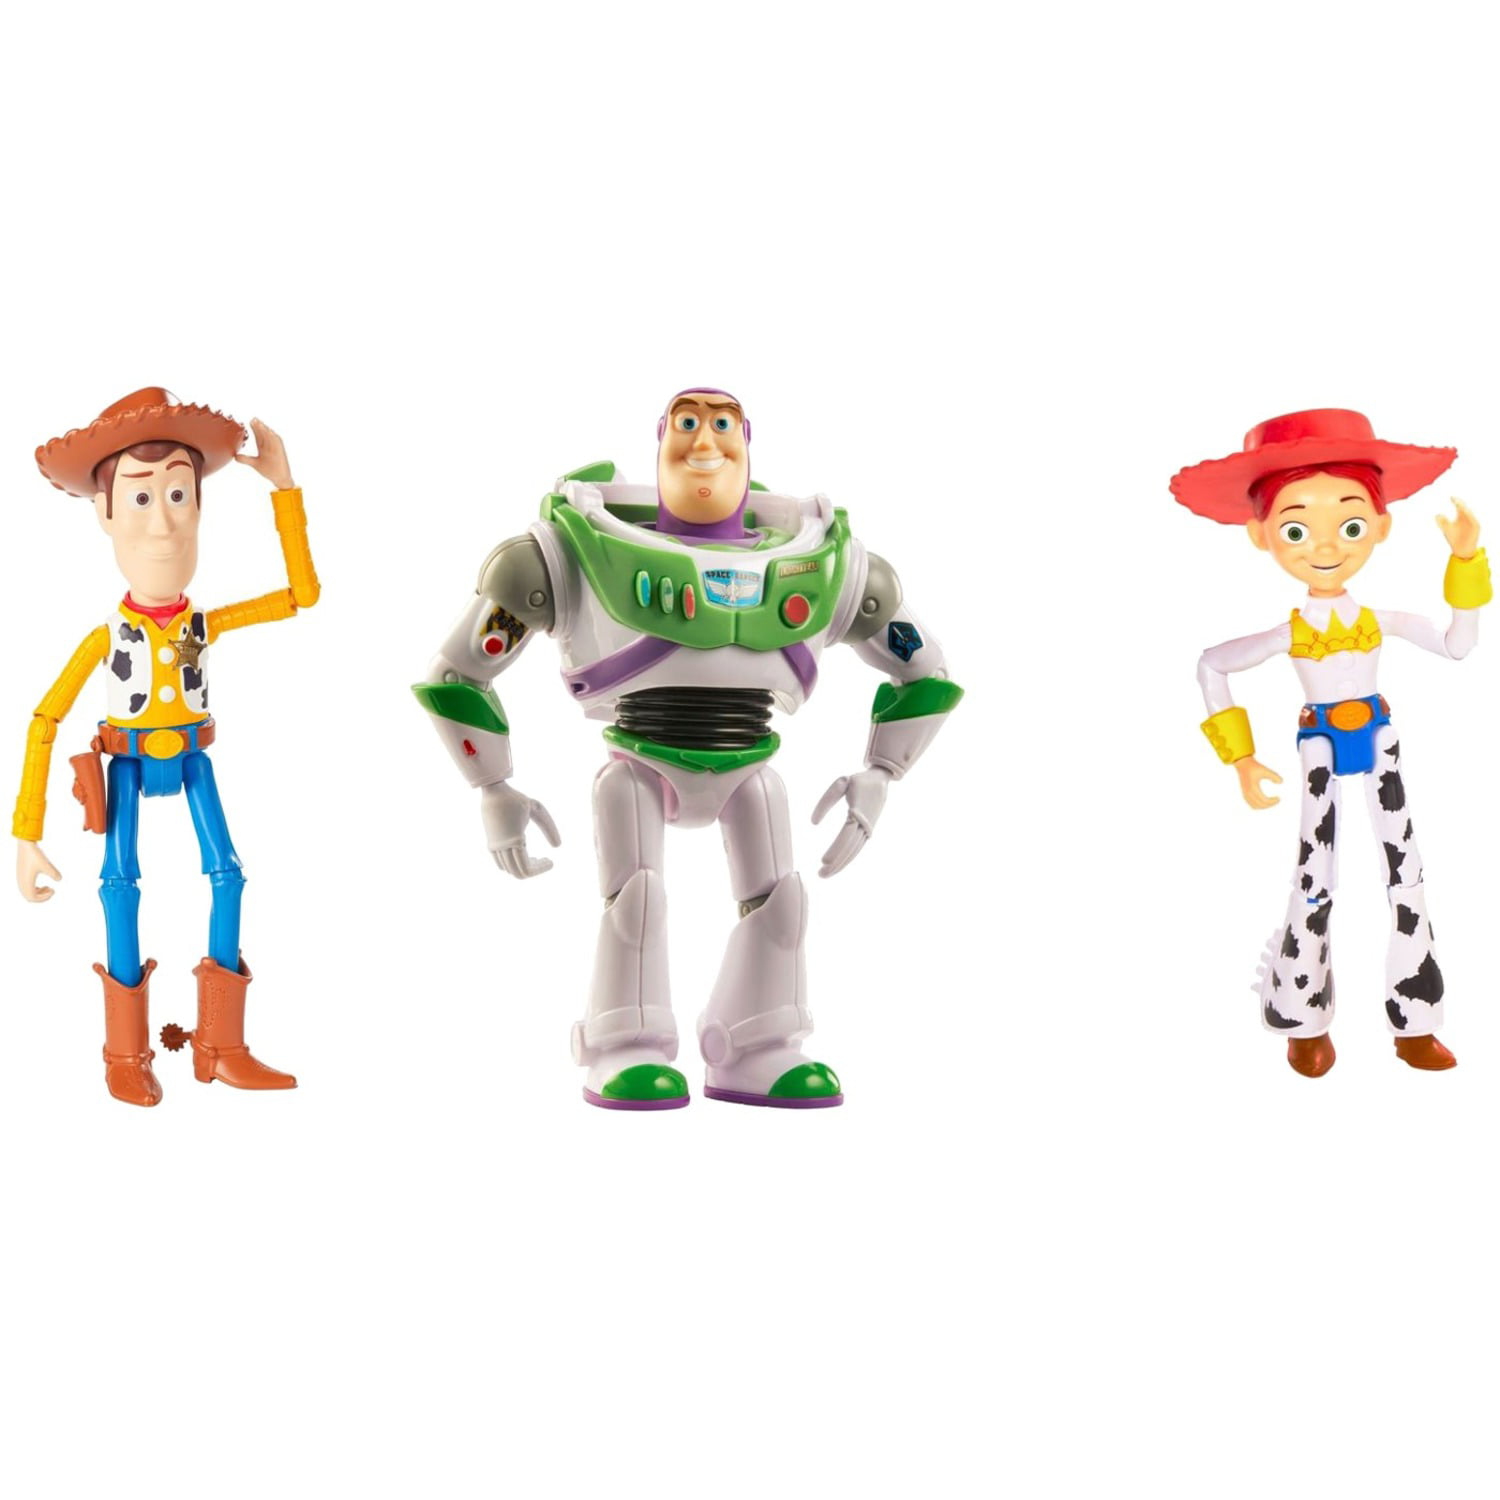 Mobel Wohnen Toy Story 4 Jessie Party Supplies Theme Novelty Event Gift Decoration Pack Fiscleconsultancy Com